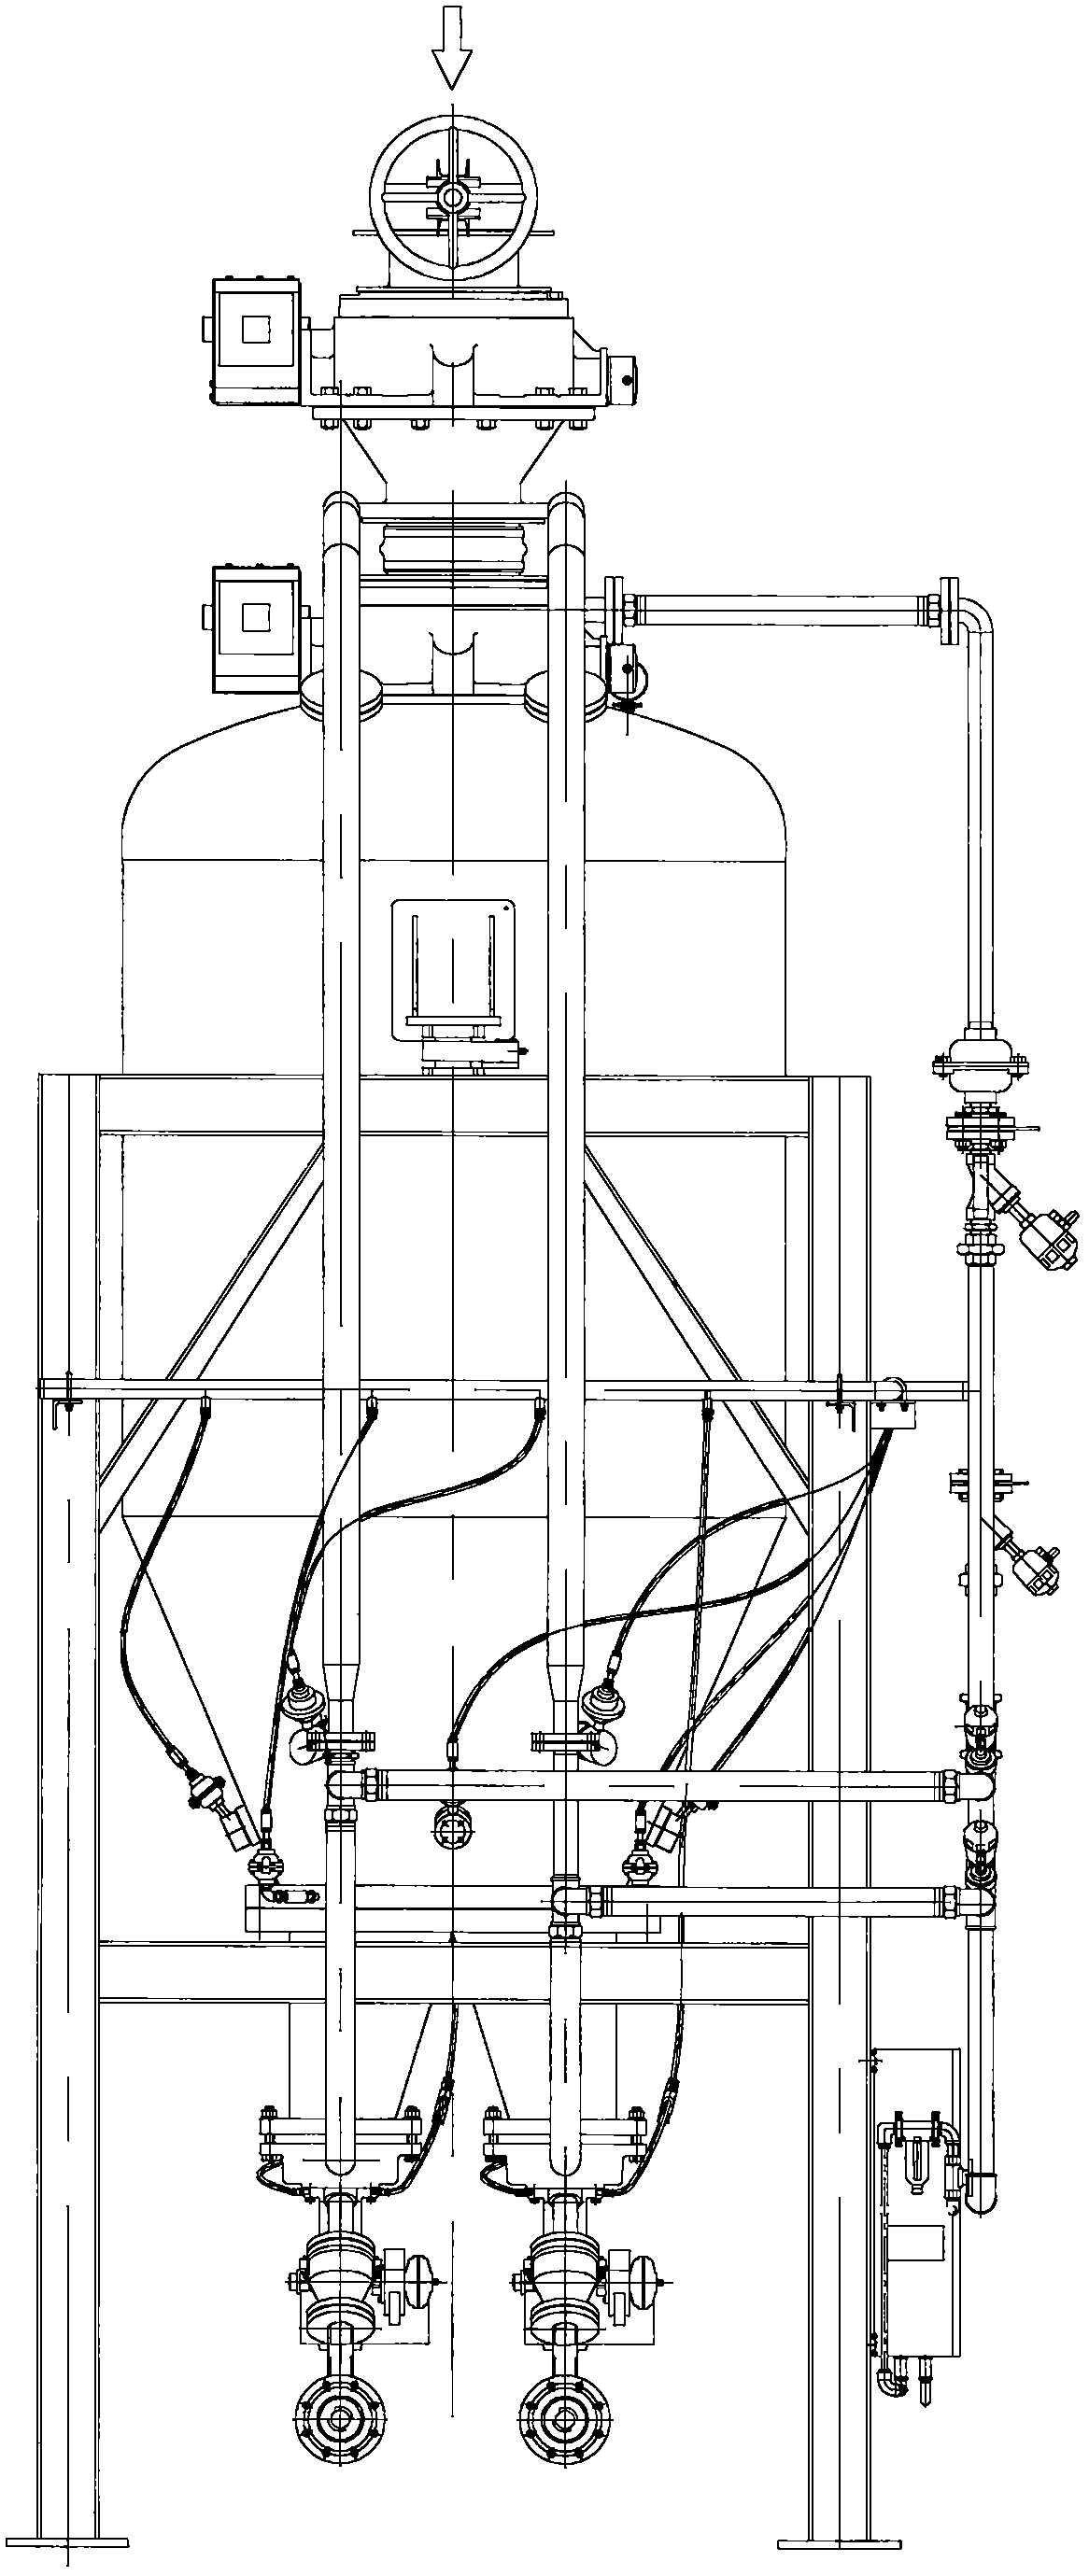 A double chamber kiln injection system